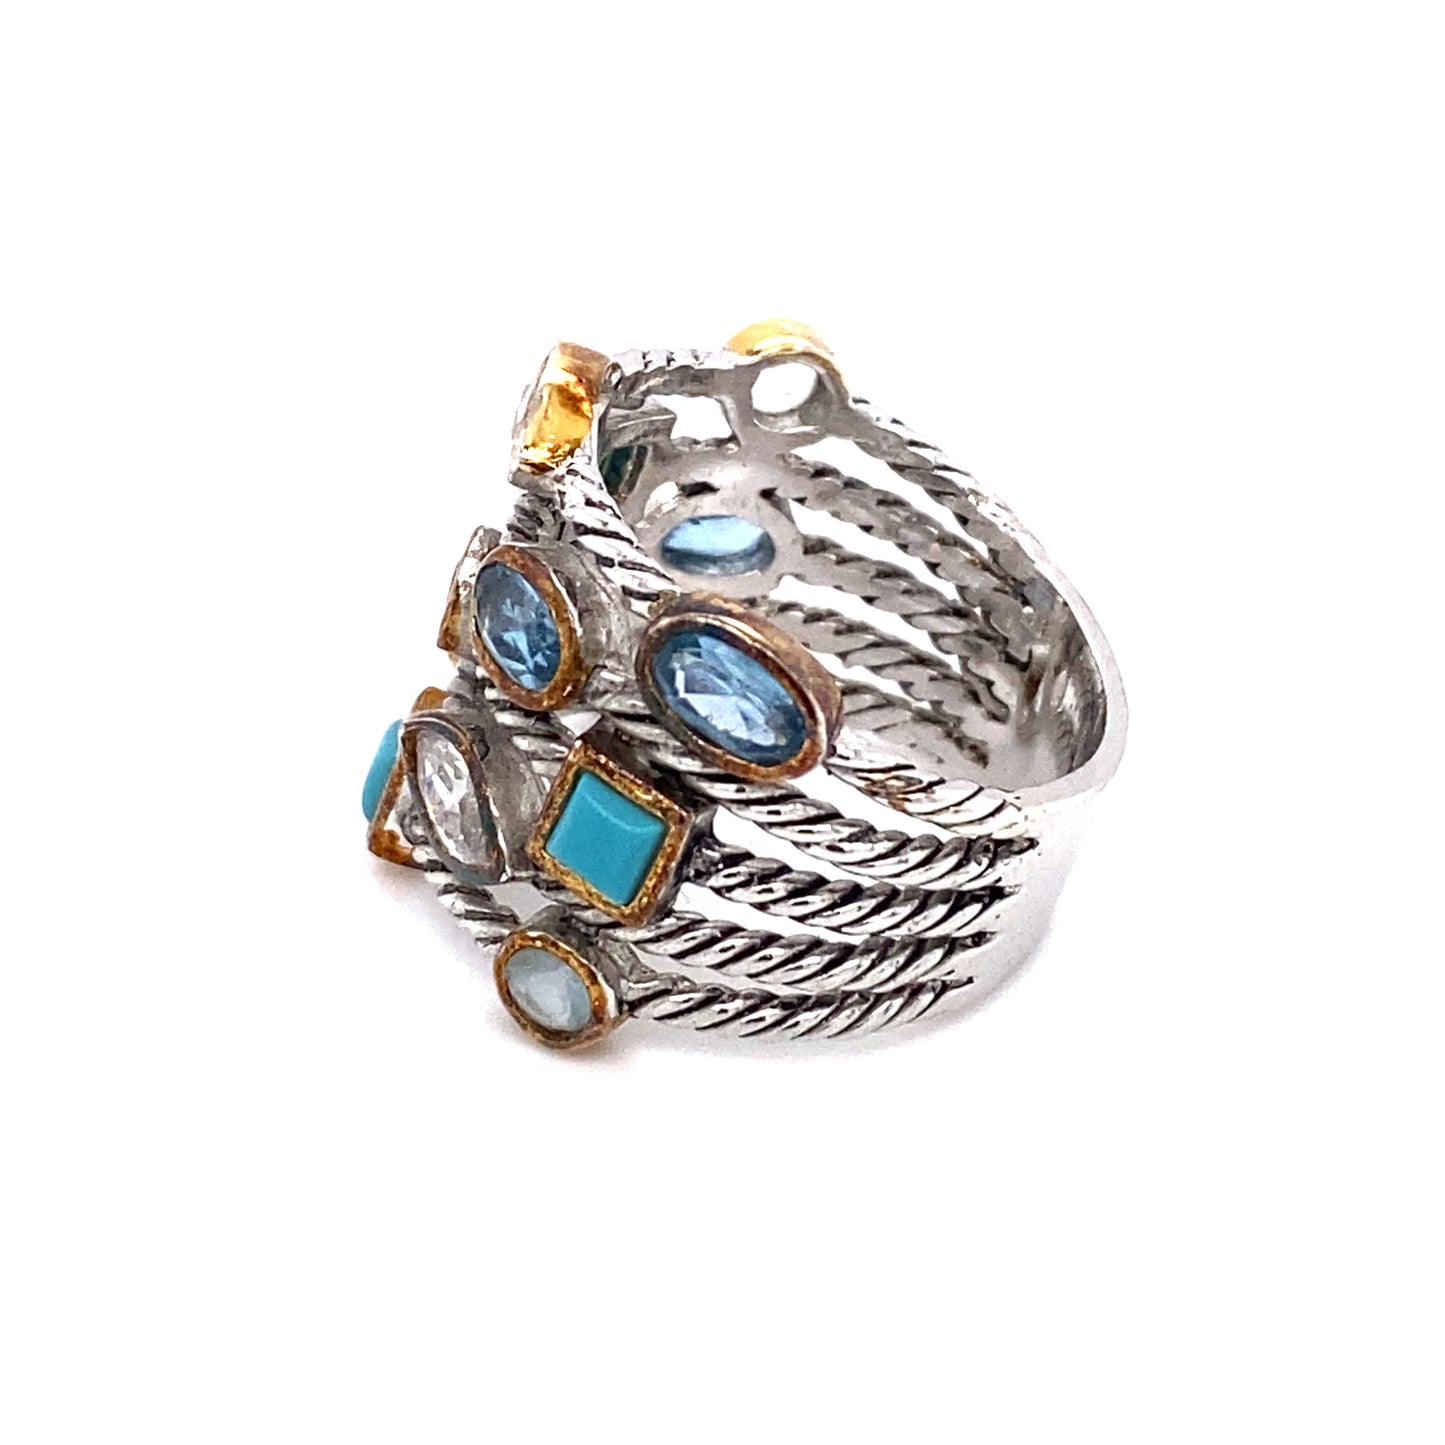 Circa 1990s Topaz, White Quartz and Turquoise Ring in Sterling Silver